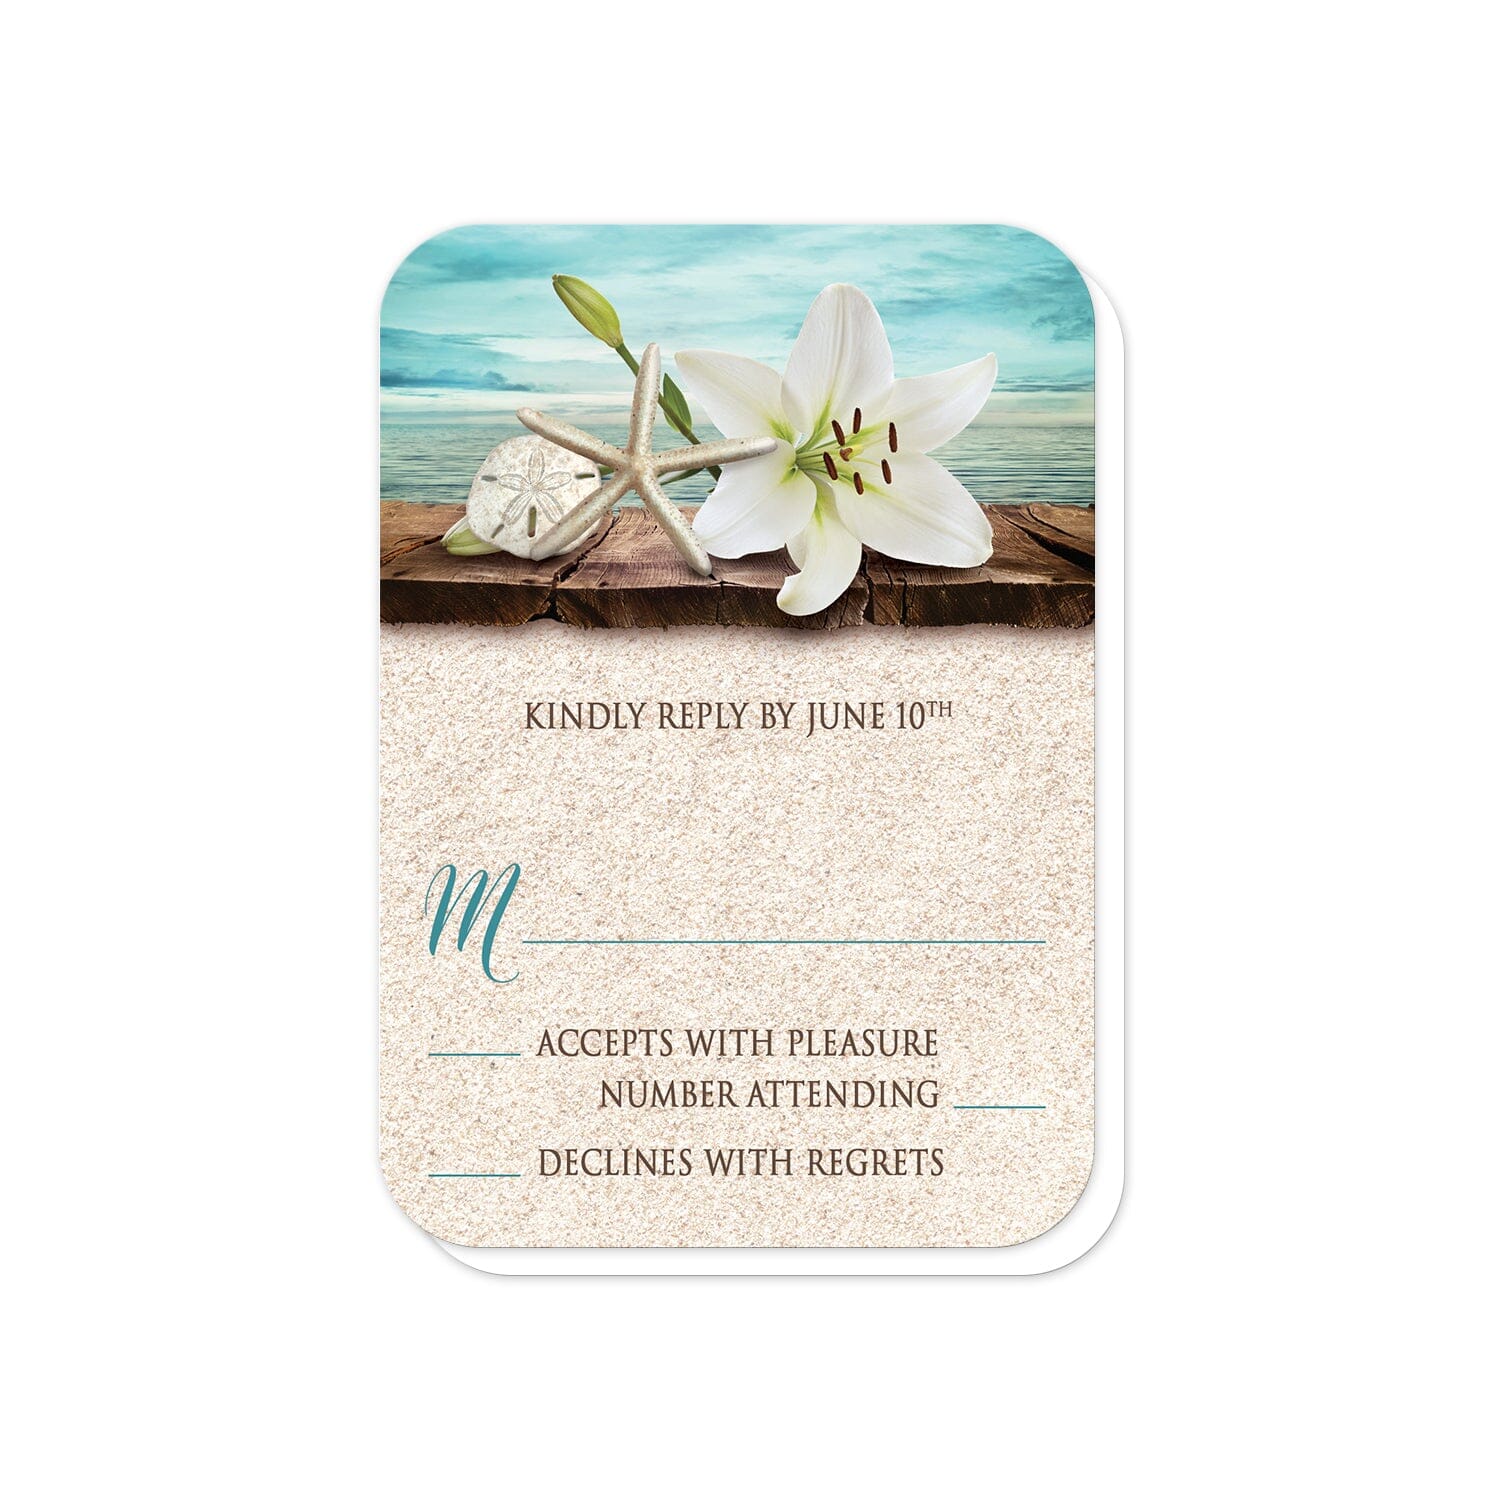 Lily Seashells and Sand Beach RSVP Cards at Artistically Invited.